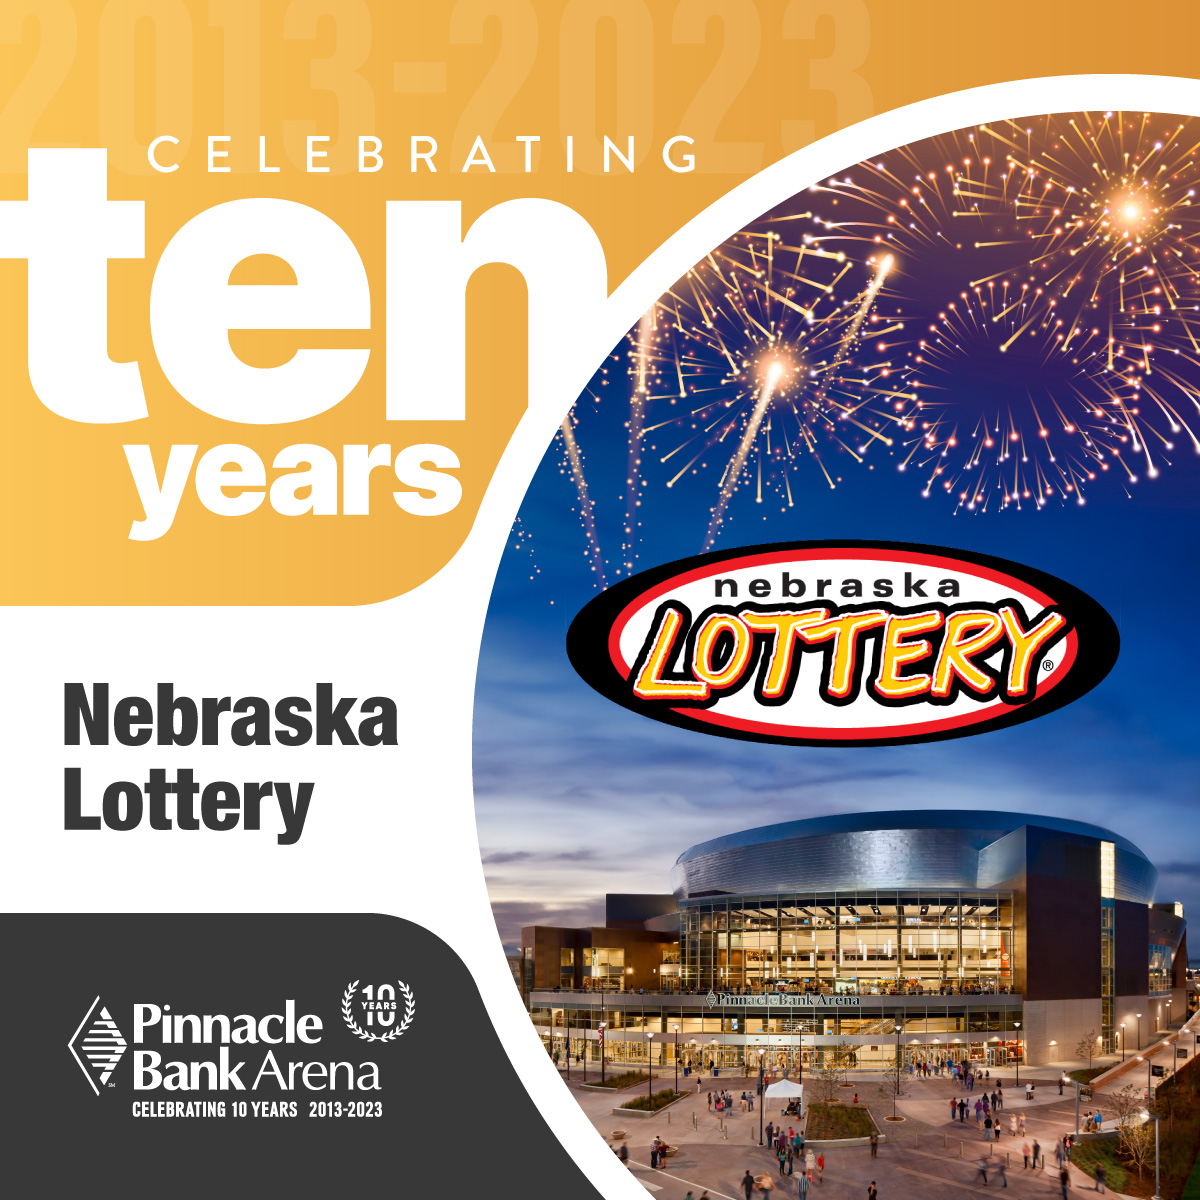 A big thank you to @NE_Lottery for being an amazing sponsor of Pinnacle Bank Arena and helping us celebrate 10 incredible years! Your support makes all the difference. 🎉